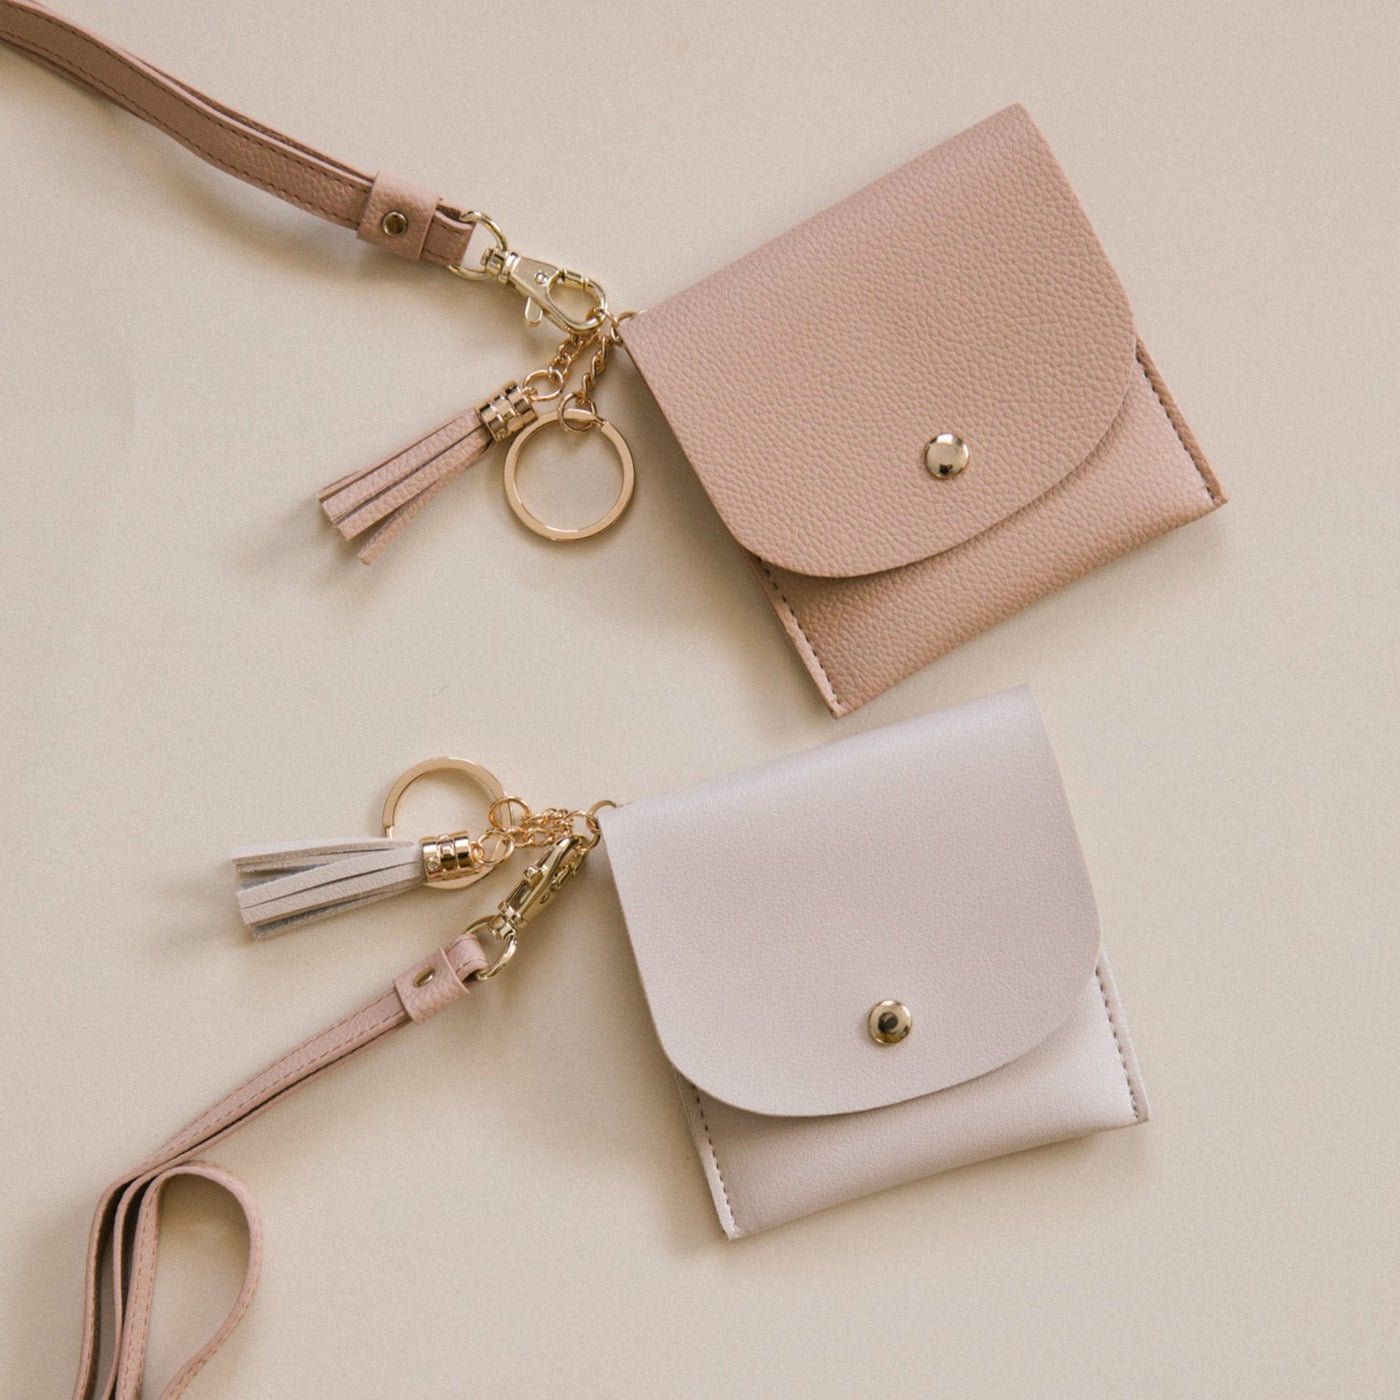 Lark and Ives Card Purse and Strap / Wallet with Strap / Mini Wallet Strap / Vegan Leather Accessories